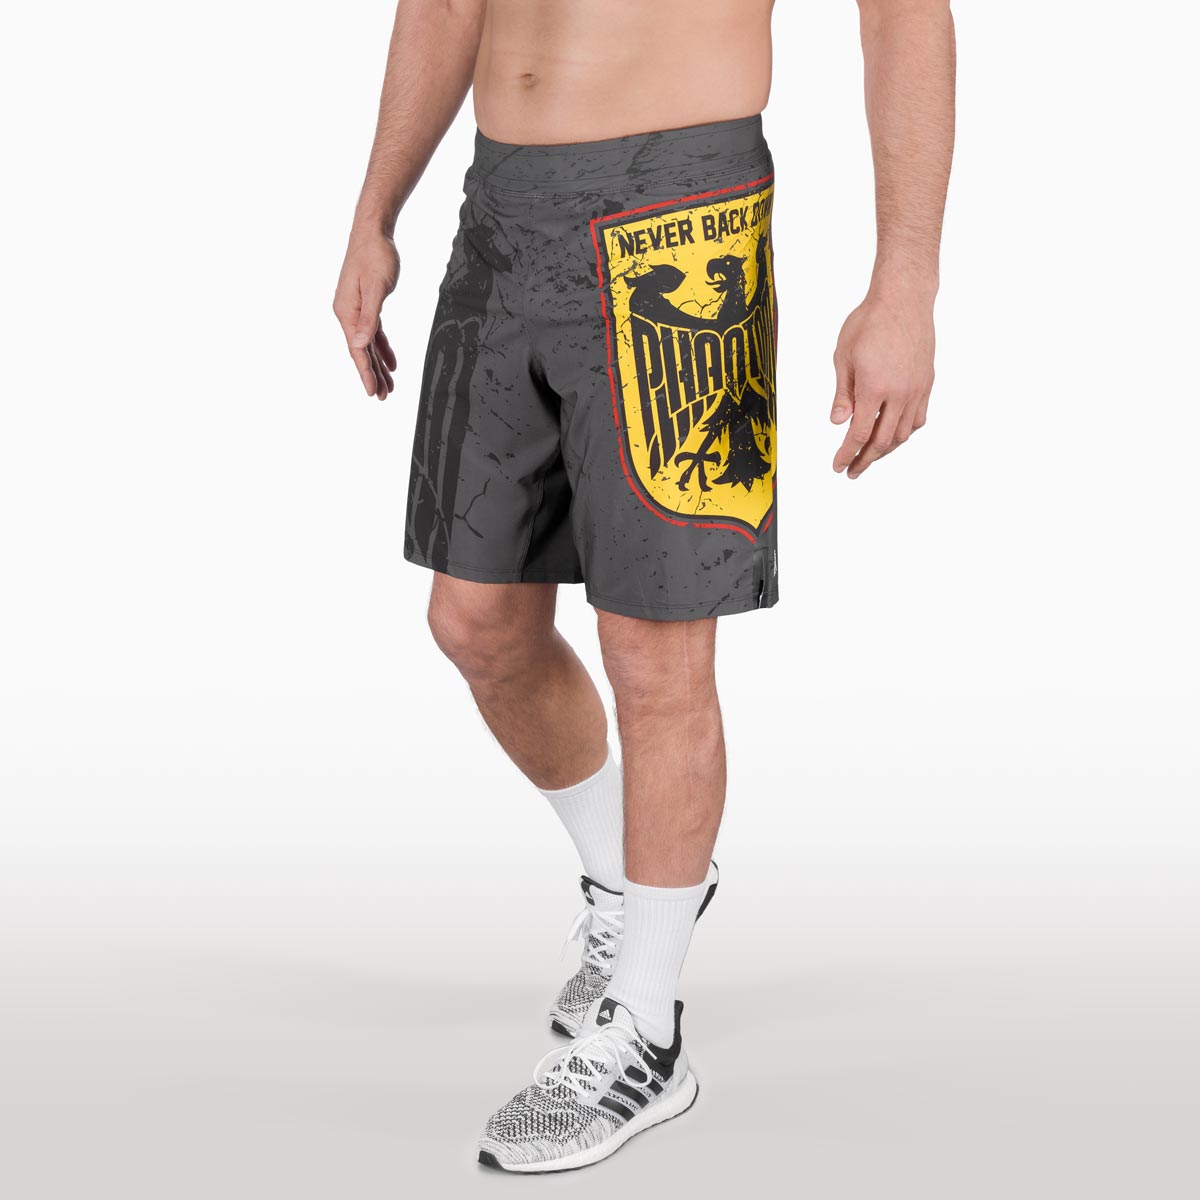 The Phantom FLEX fight shorts are among the best fight shorts on the market. Ultralight, extremely flexible and tear-resistant. Reduced to an absolute minimum, it offers you maximum performance in your martial arts. No matter whether BJJ, MMA, Muay Thai or kickboxing. The FLEX shorts from Phantom Athletics bring out the best in you. Here in the limited Germany Edition.